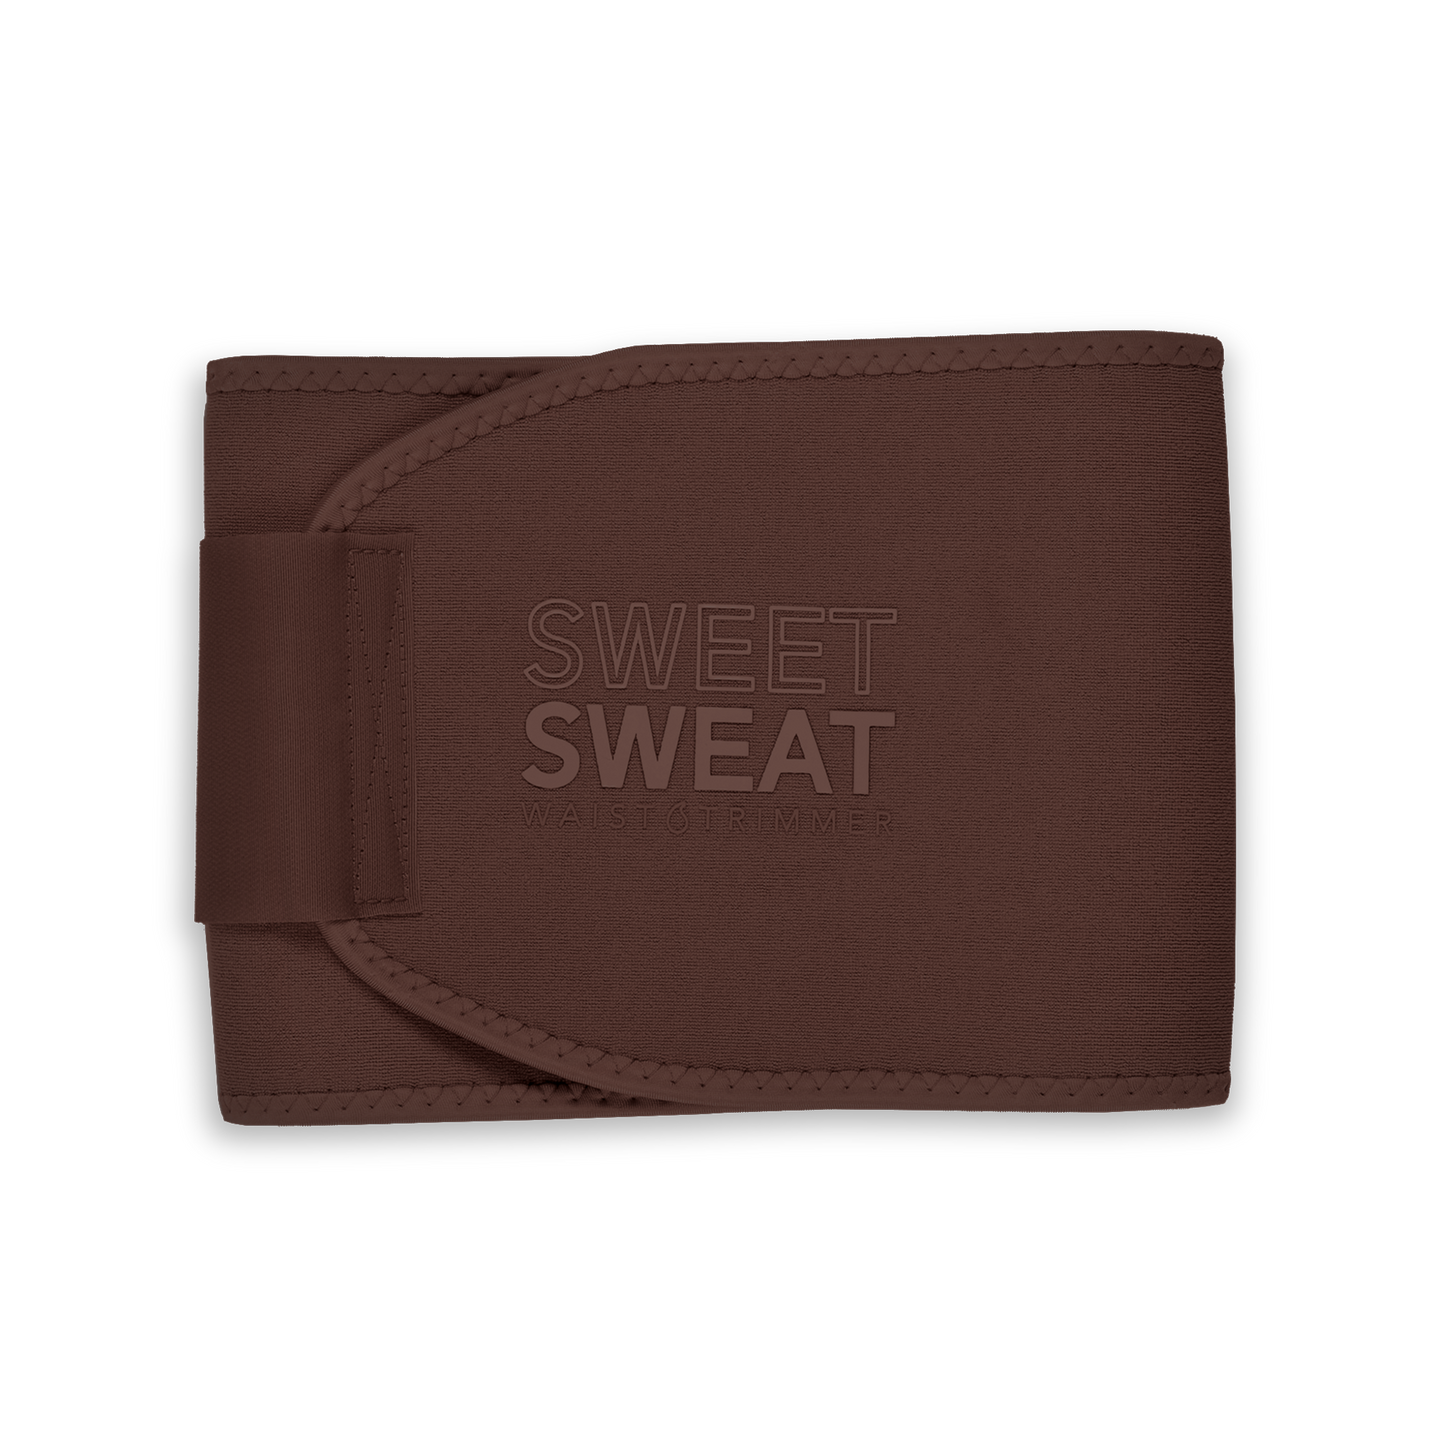 a brown belt with the words "Sweet Sweat® Toned Waist Trimmer" by Sports Research on it.